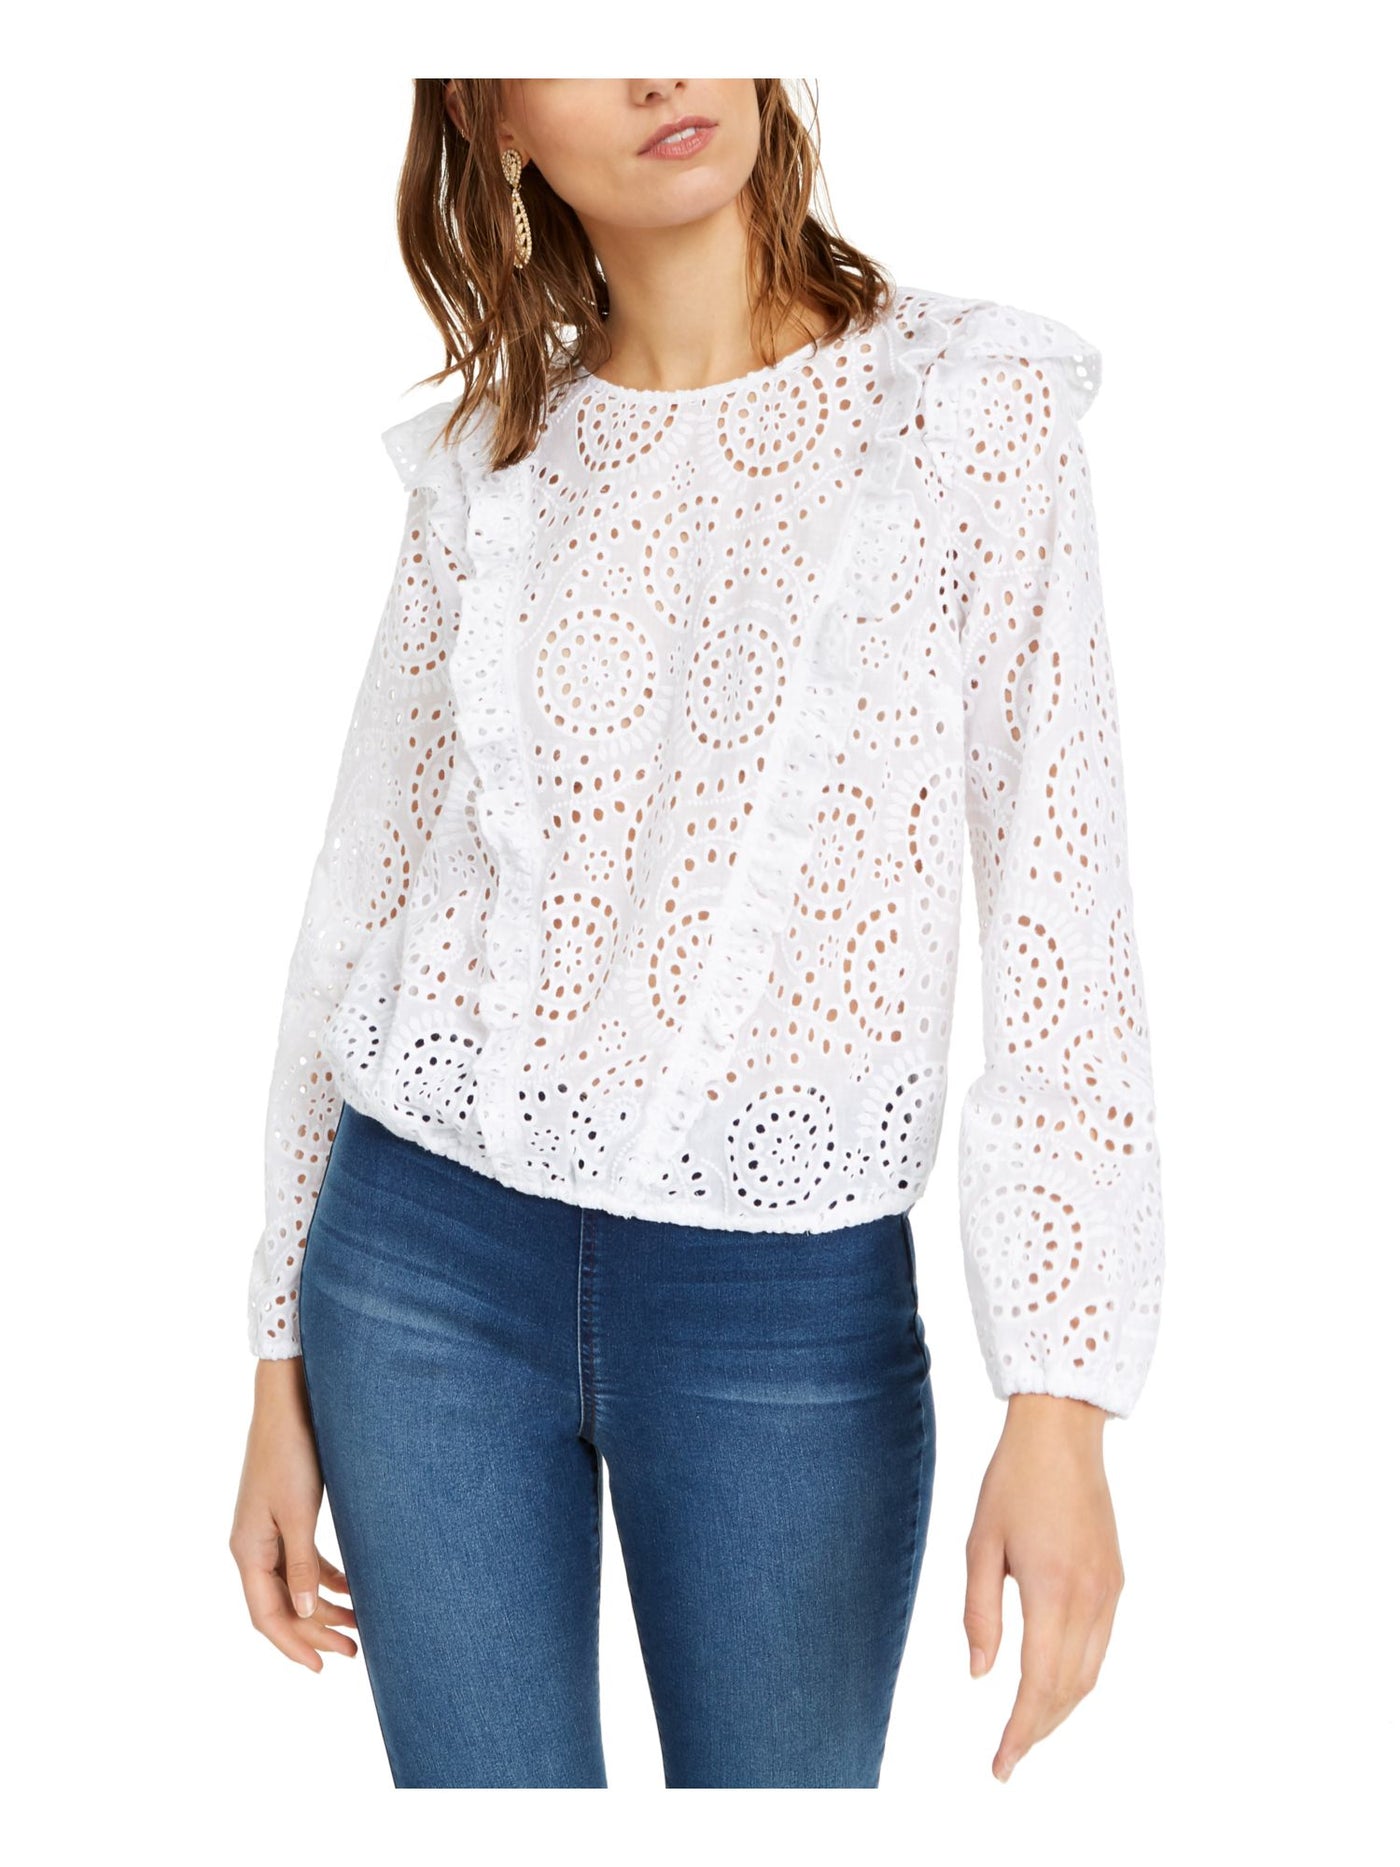 INC Womens White Lace Patterned Long Sleeve Crew Neck Blouse XS